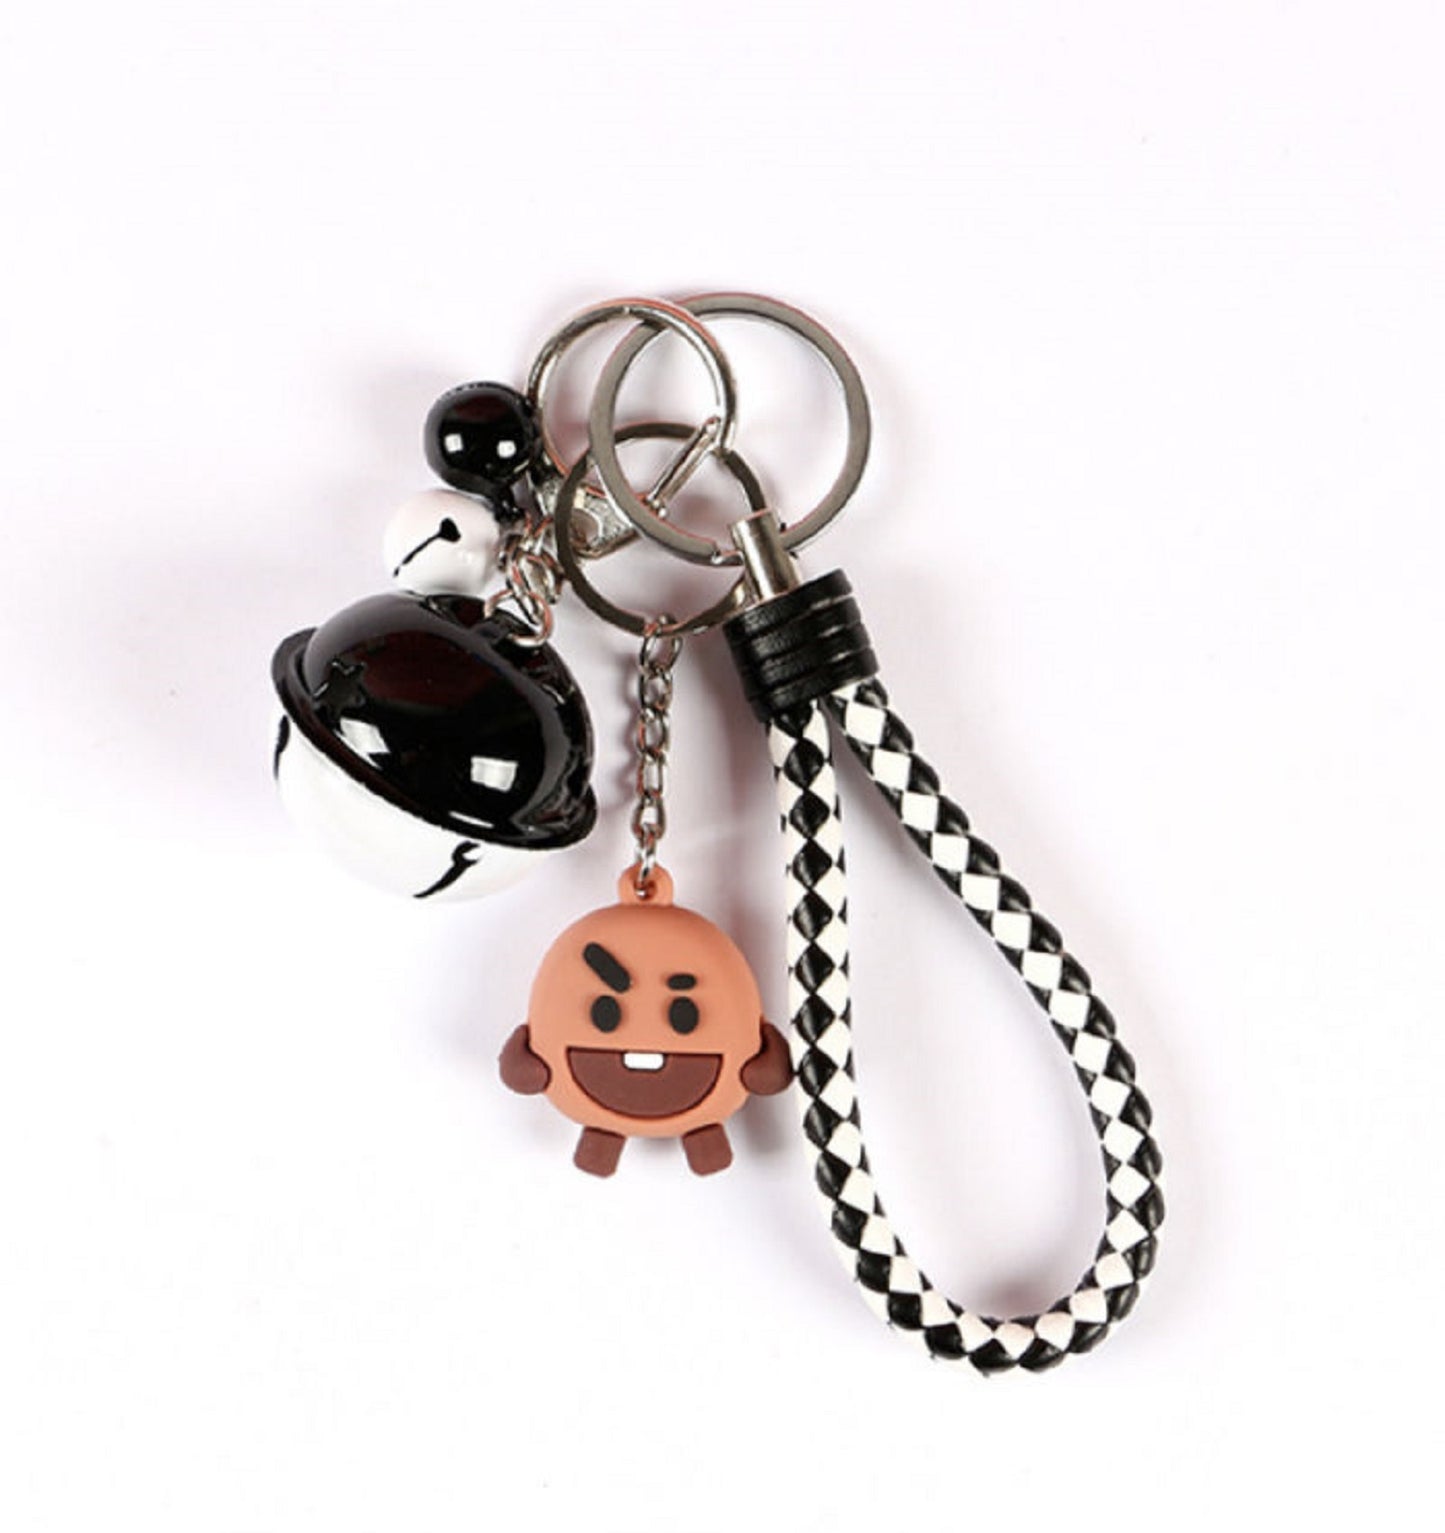 K-Pop BTS Keychain Bell BT21 - Super Anime Store FREE SHIPPING FAST SHIPPING USA